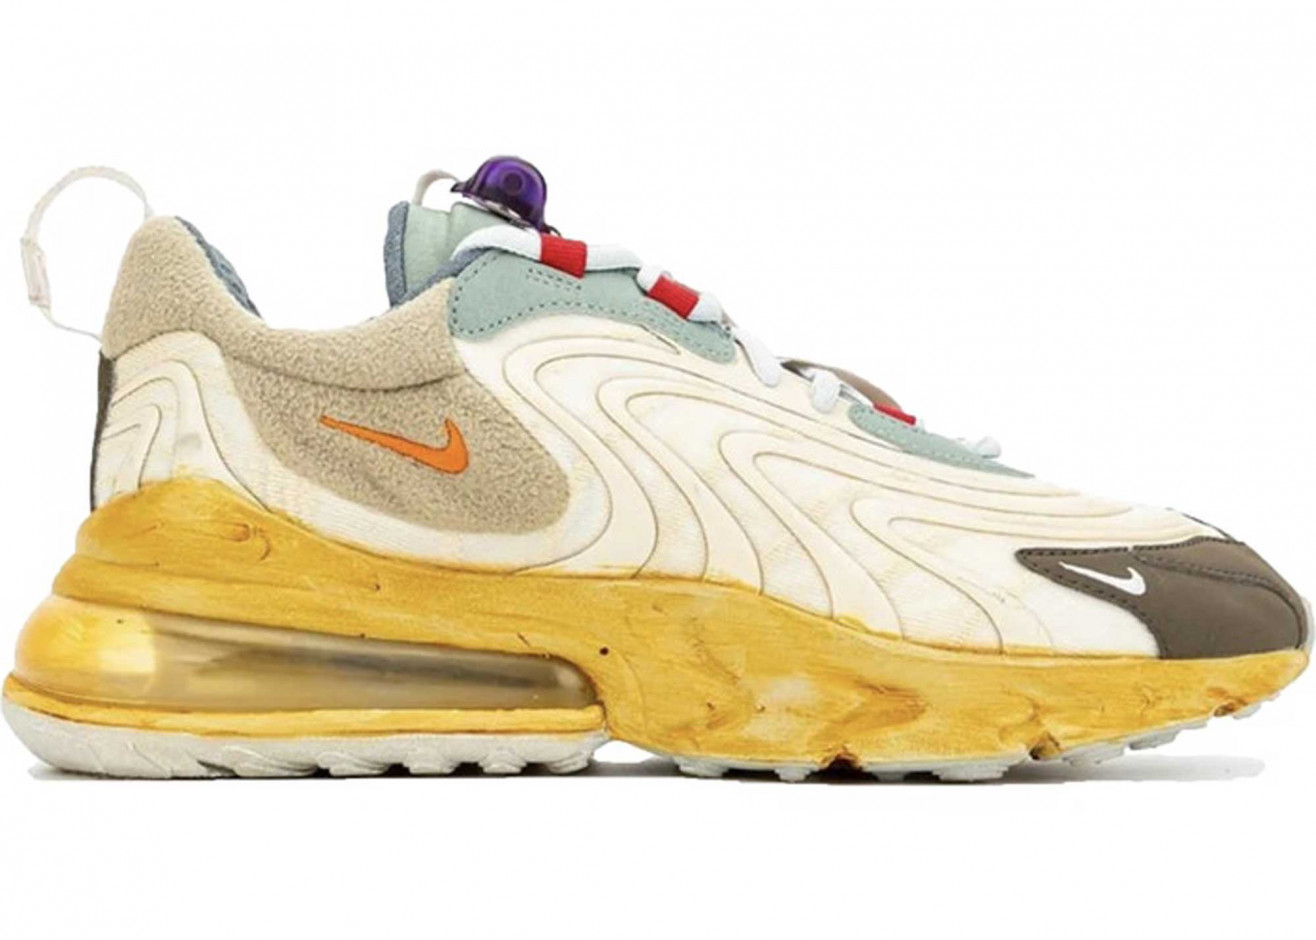 sneaker releases may 2020